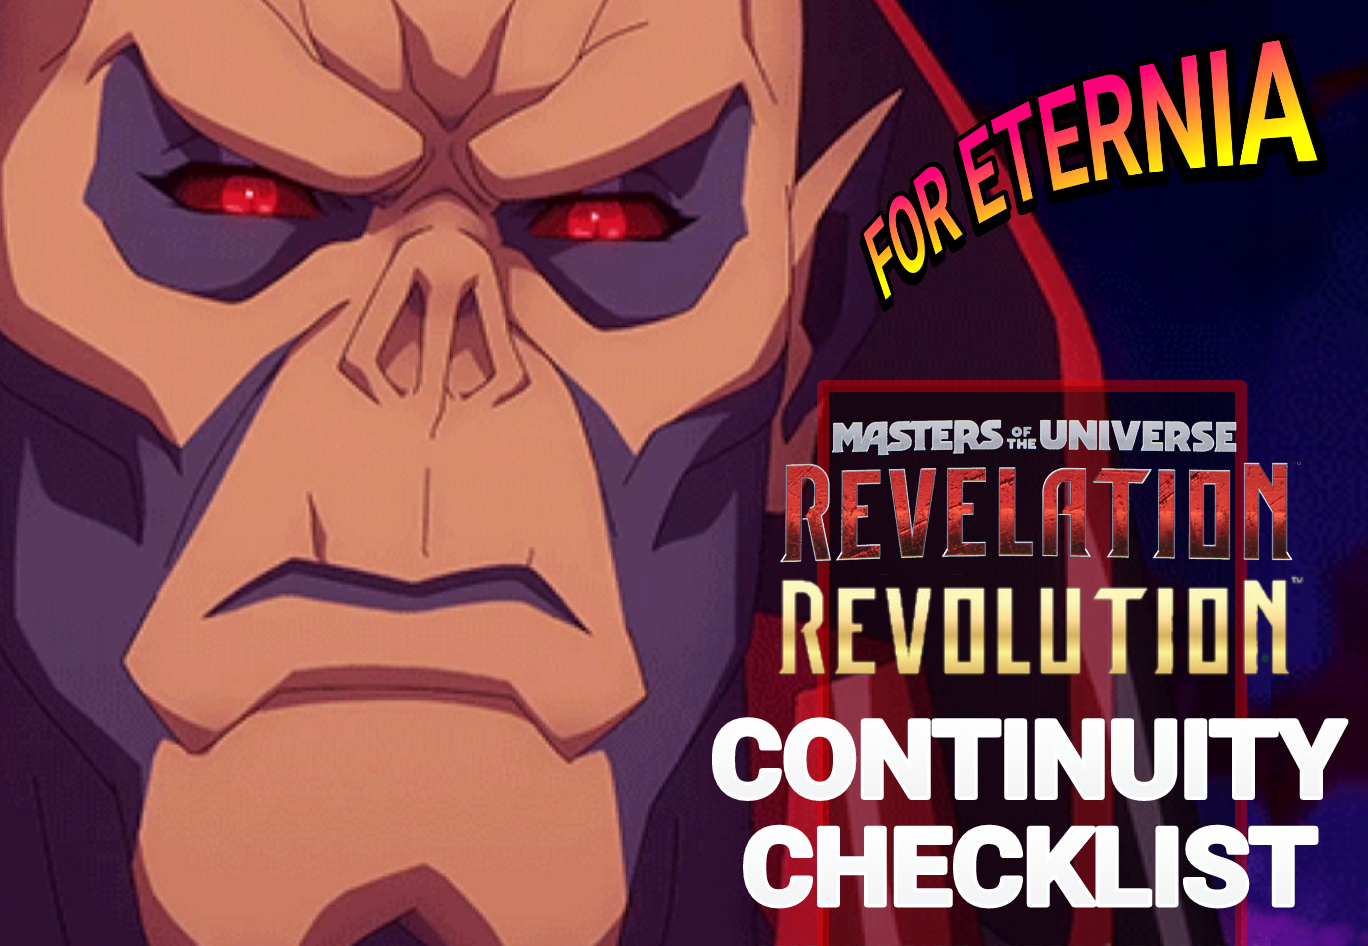 MEDIA CHECKLIST: Catch up with the Comics & Shows in the ”Masters of the Universe: Revelation & Revolution” Continuity